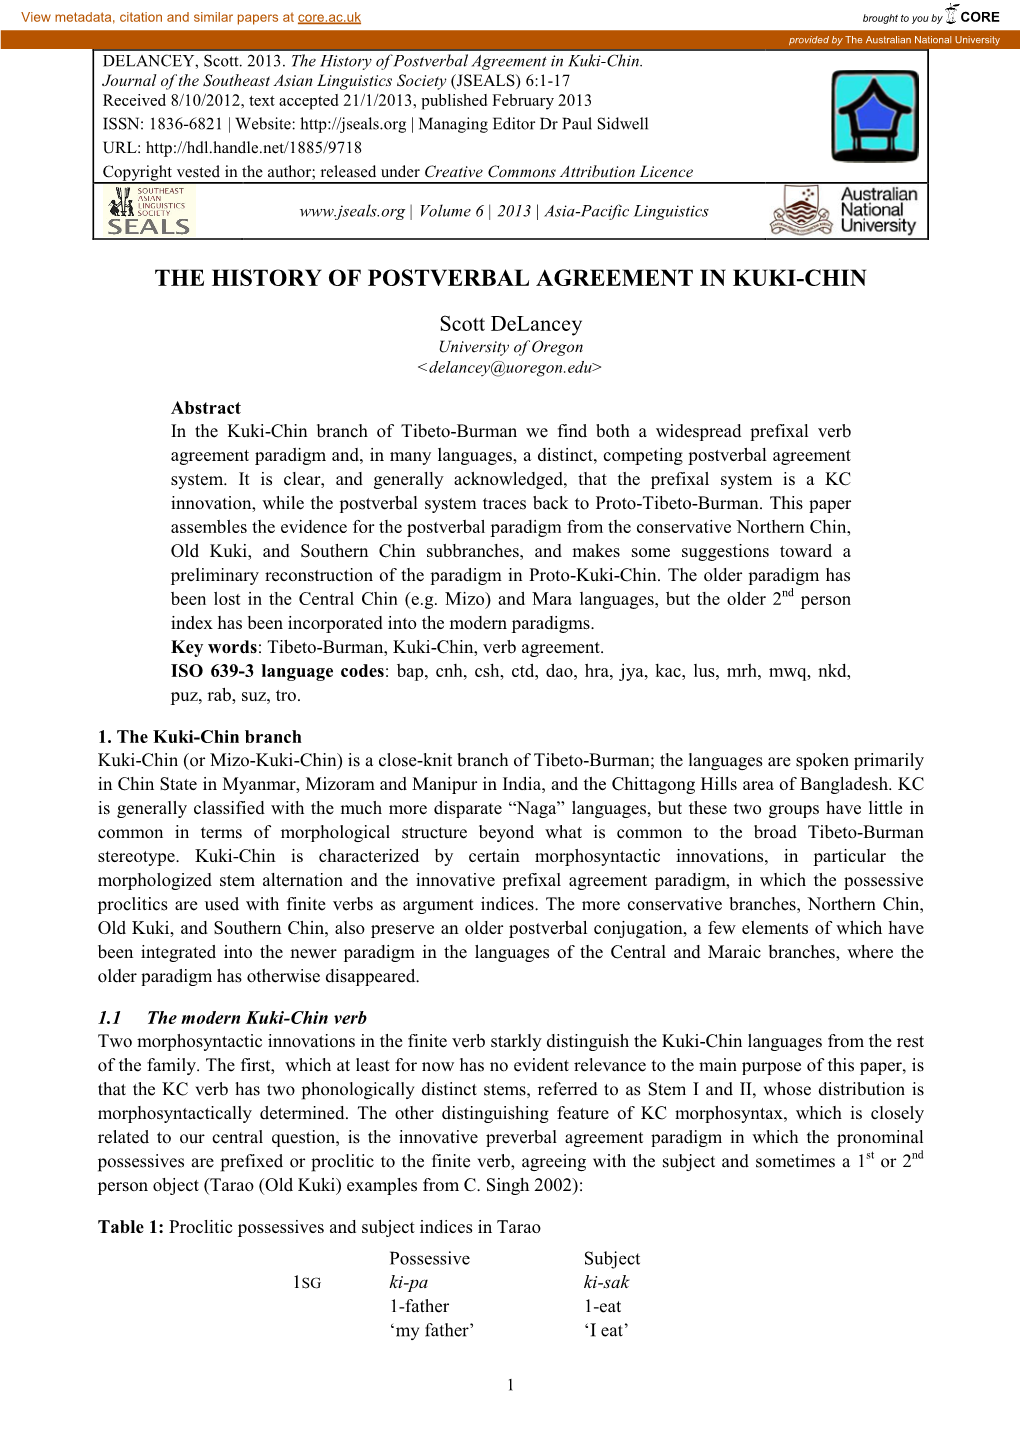 The History of Postverbal Agreement in Kuki-Chin